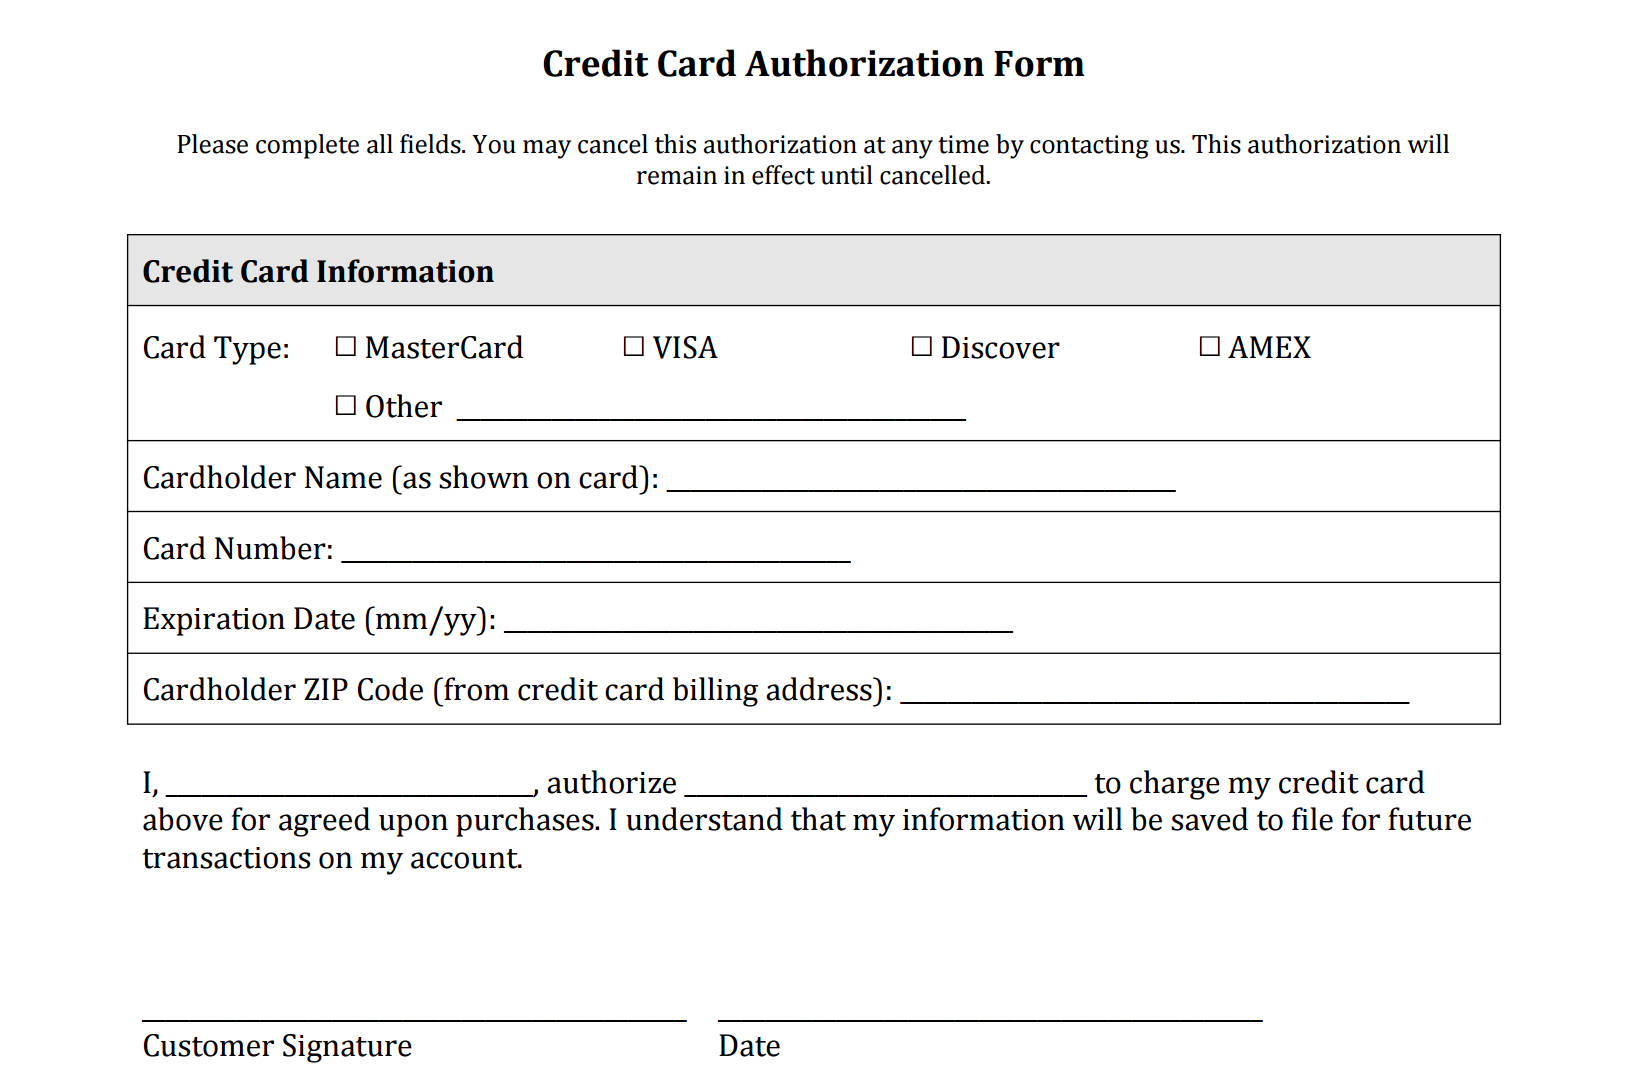 Credit Card Authorization Form Templates [Download] - Free Printable Membership Forms